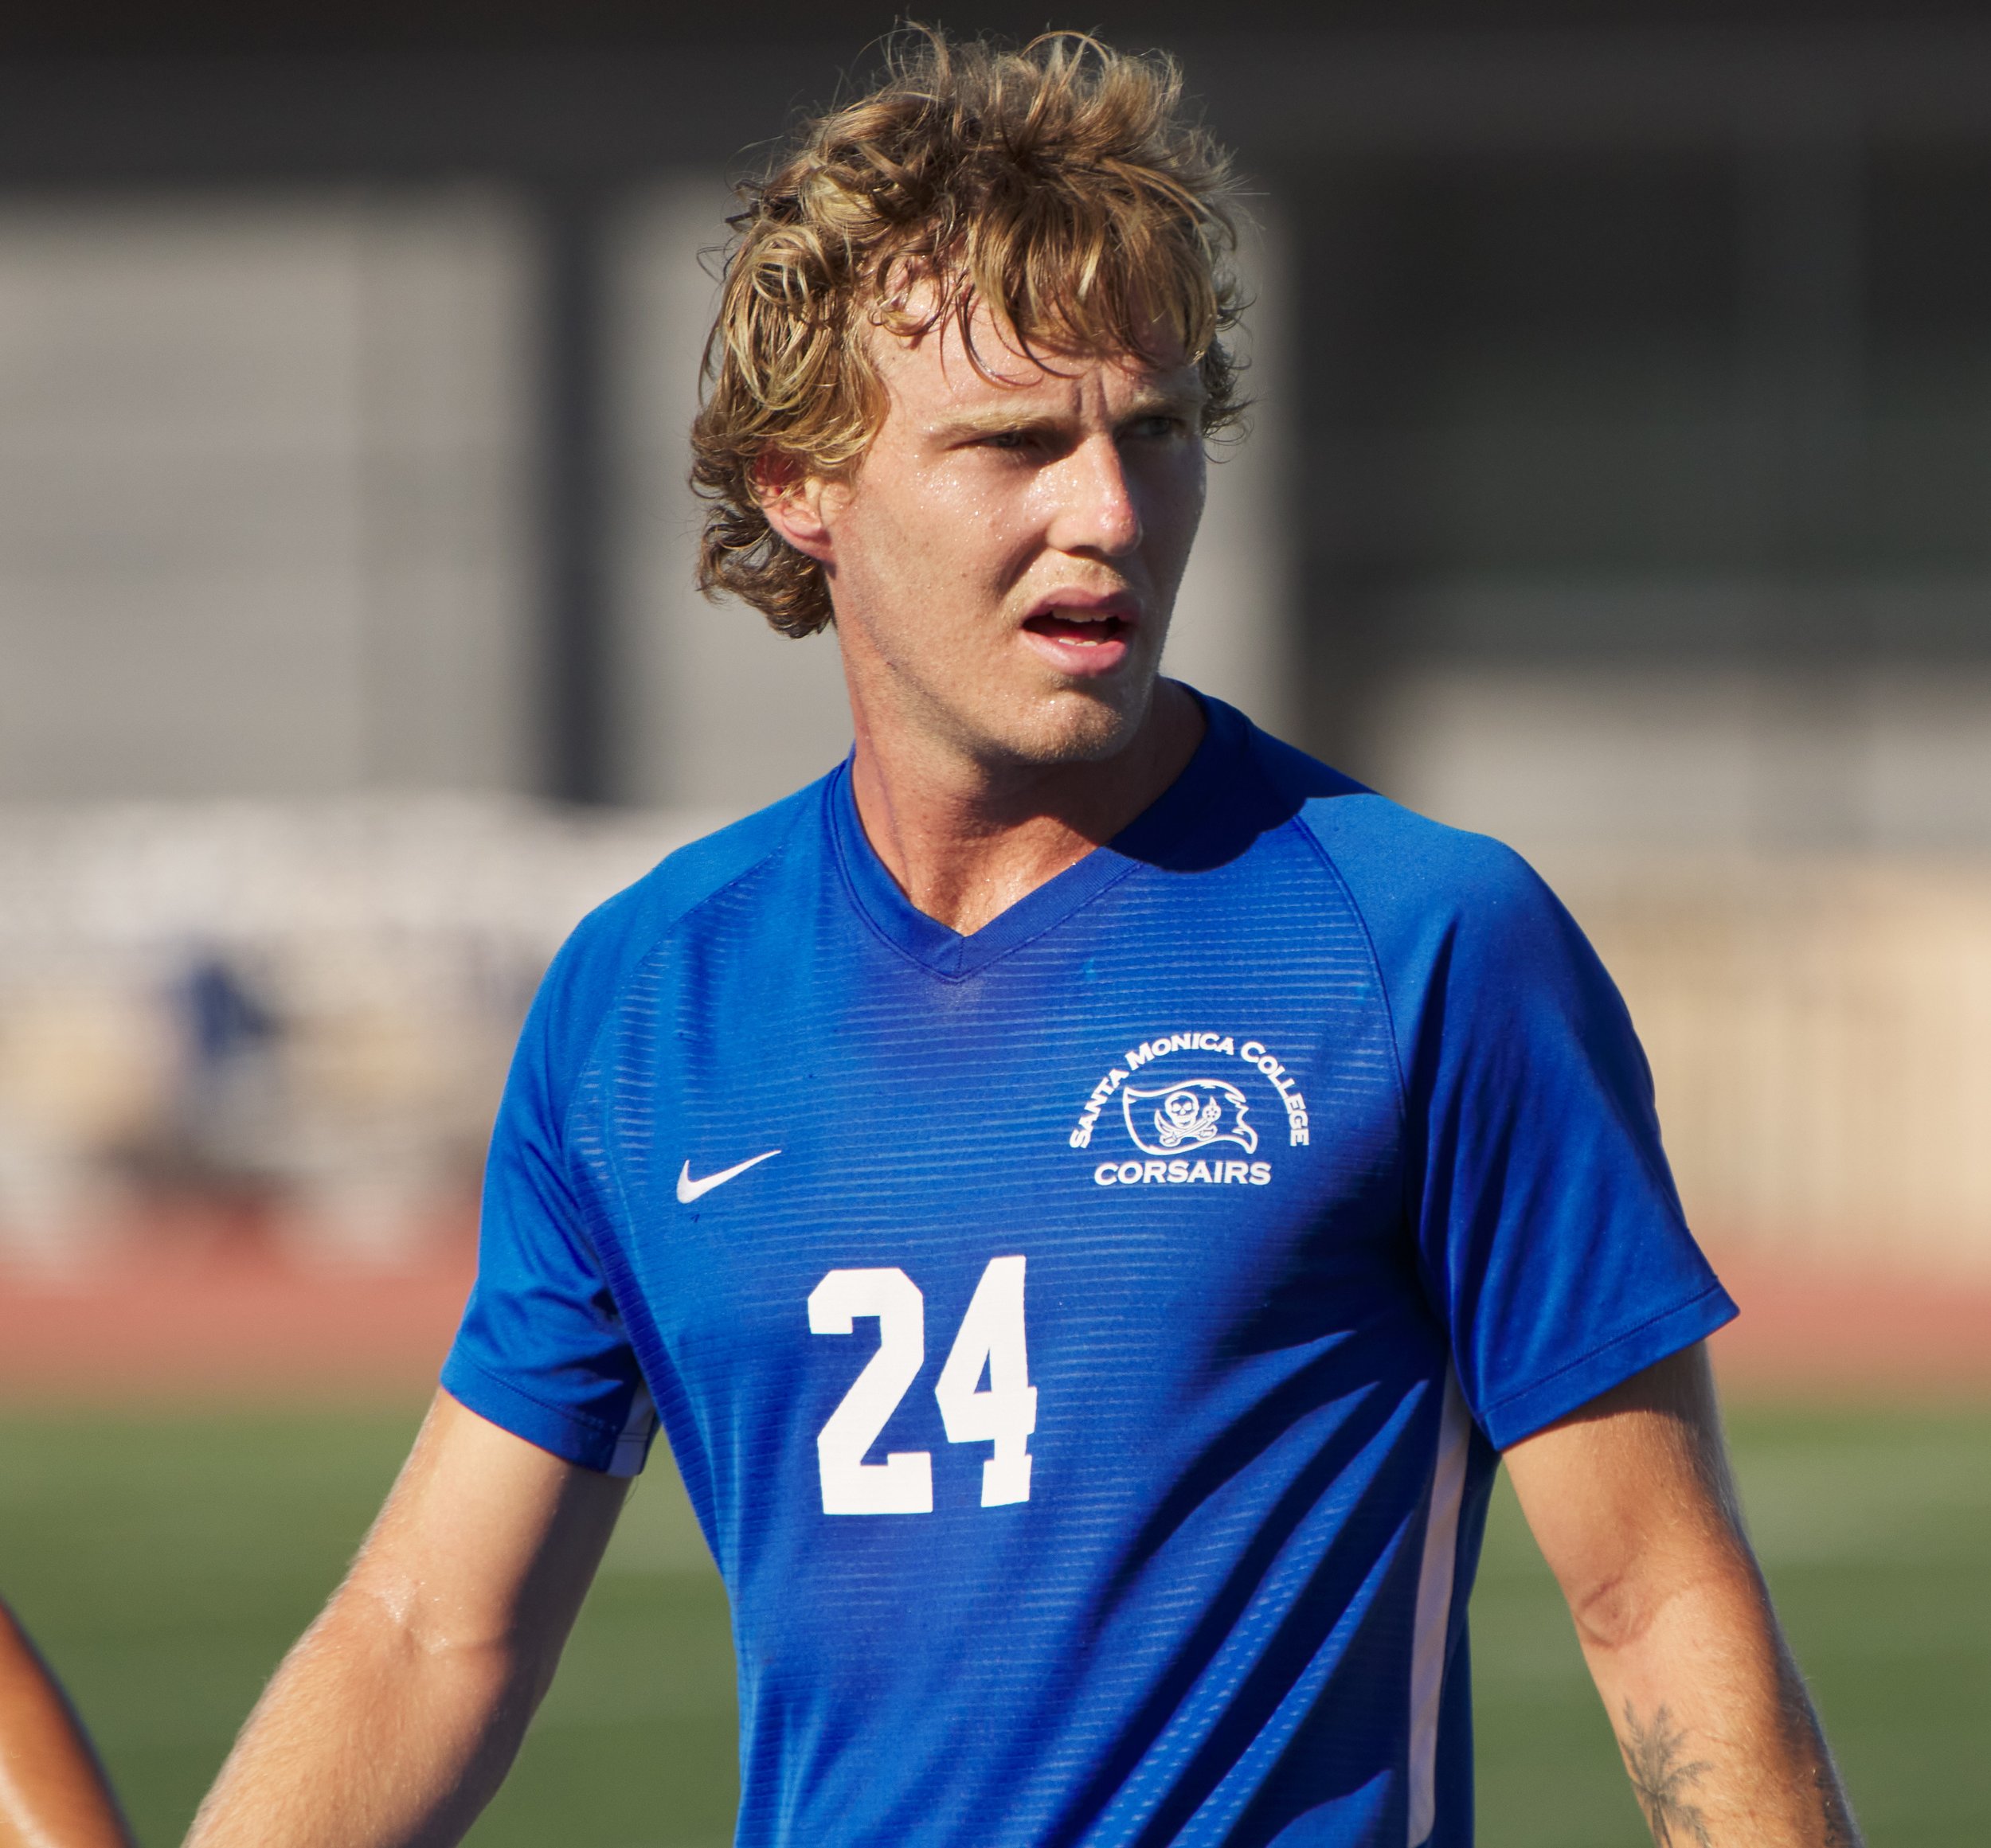  Santa Monica College Corsairs' Alexander Lalor during the mens soccer match against the Rio Hondo College Roadrunners on Friday, Sept. 24, 2022, at Corsair Field in Santa Monica, Calif. The Corsairs won 2-1. (Nicholas McCall | The Corsair) 